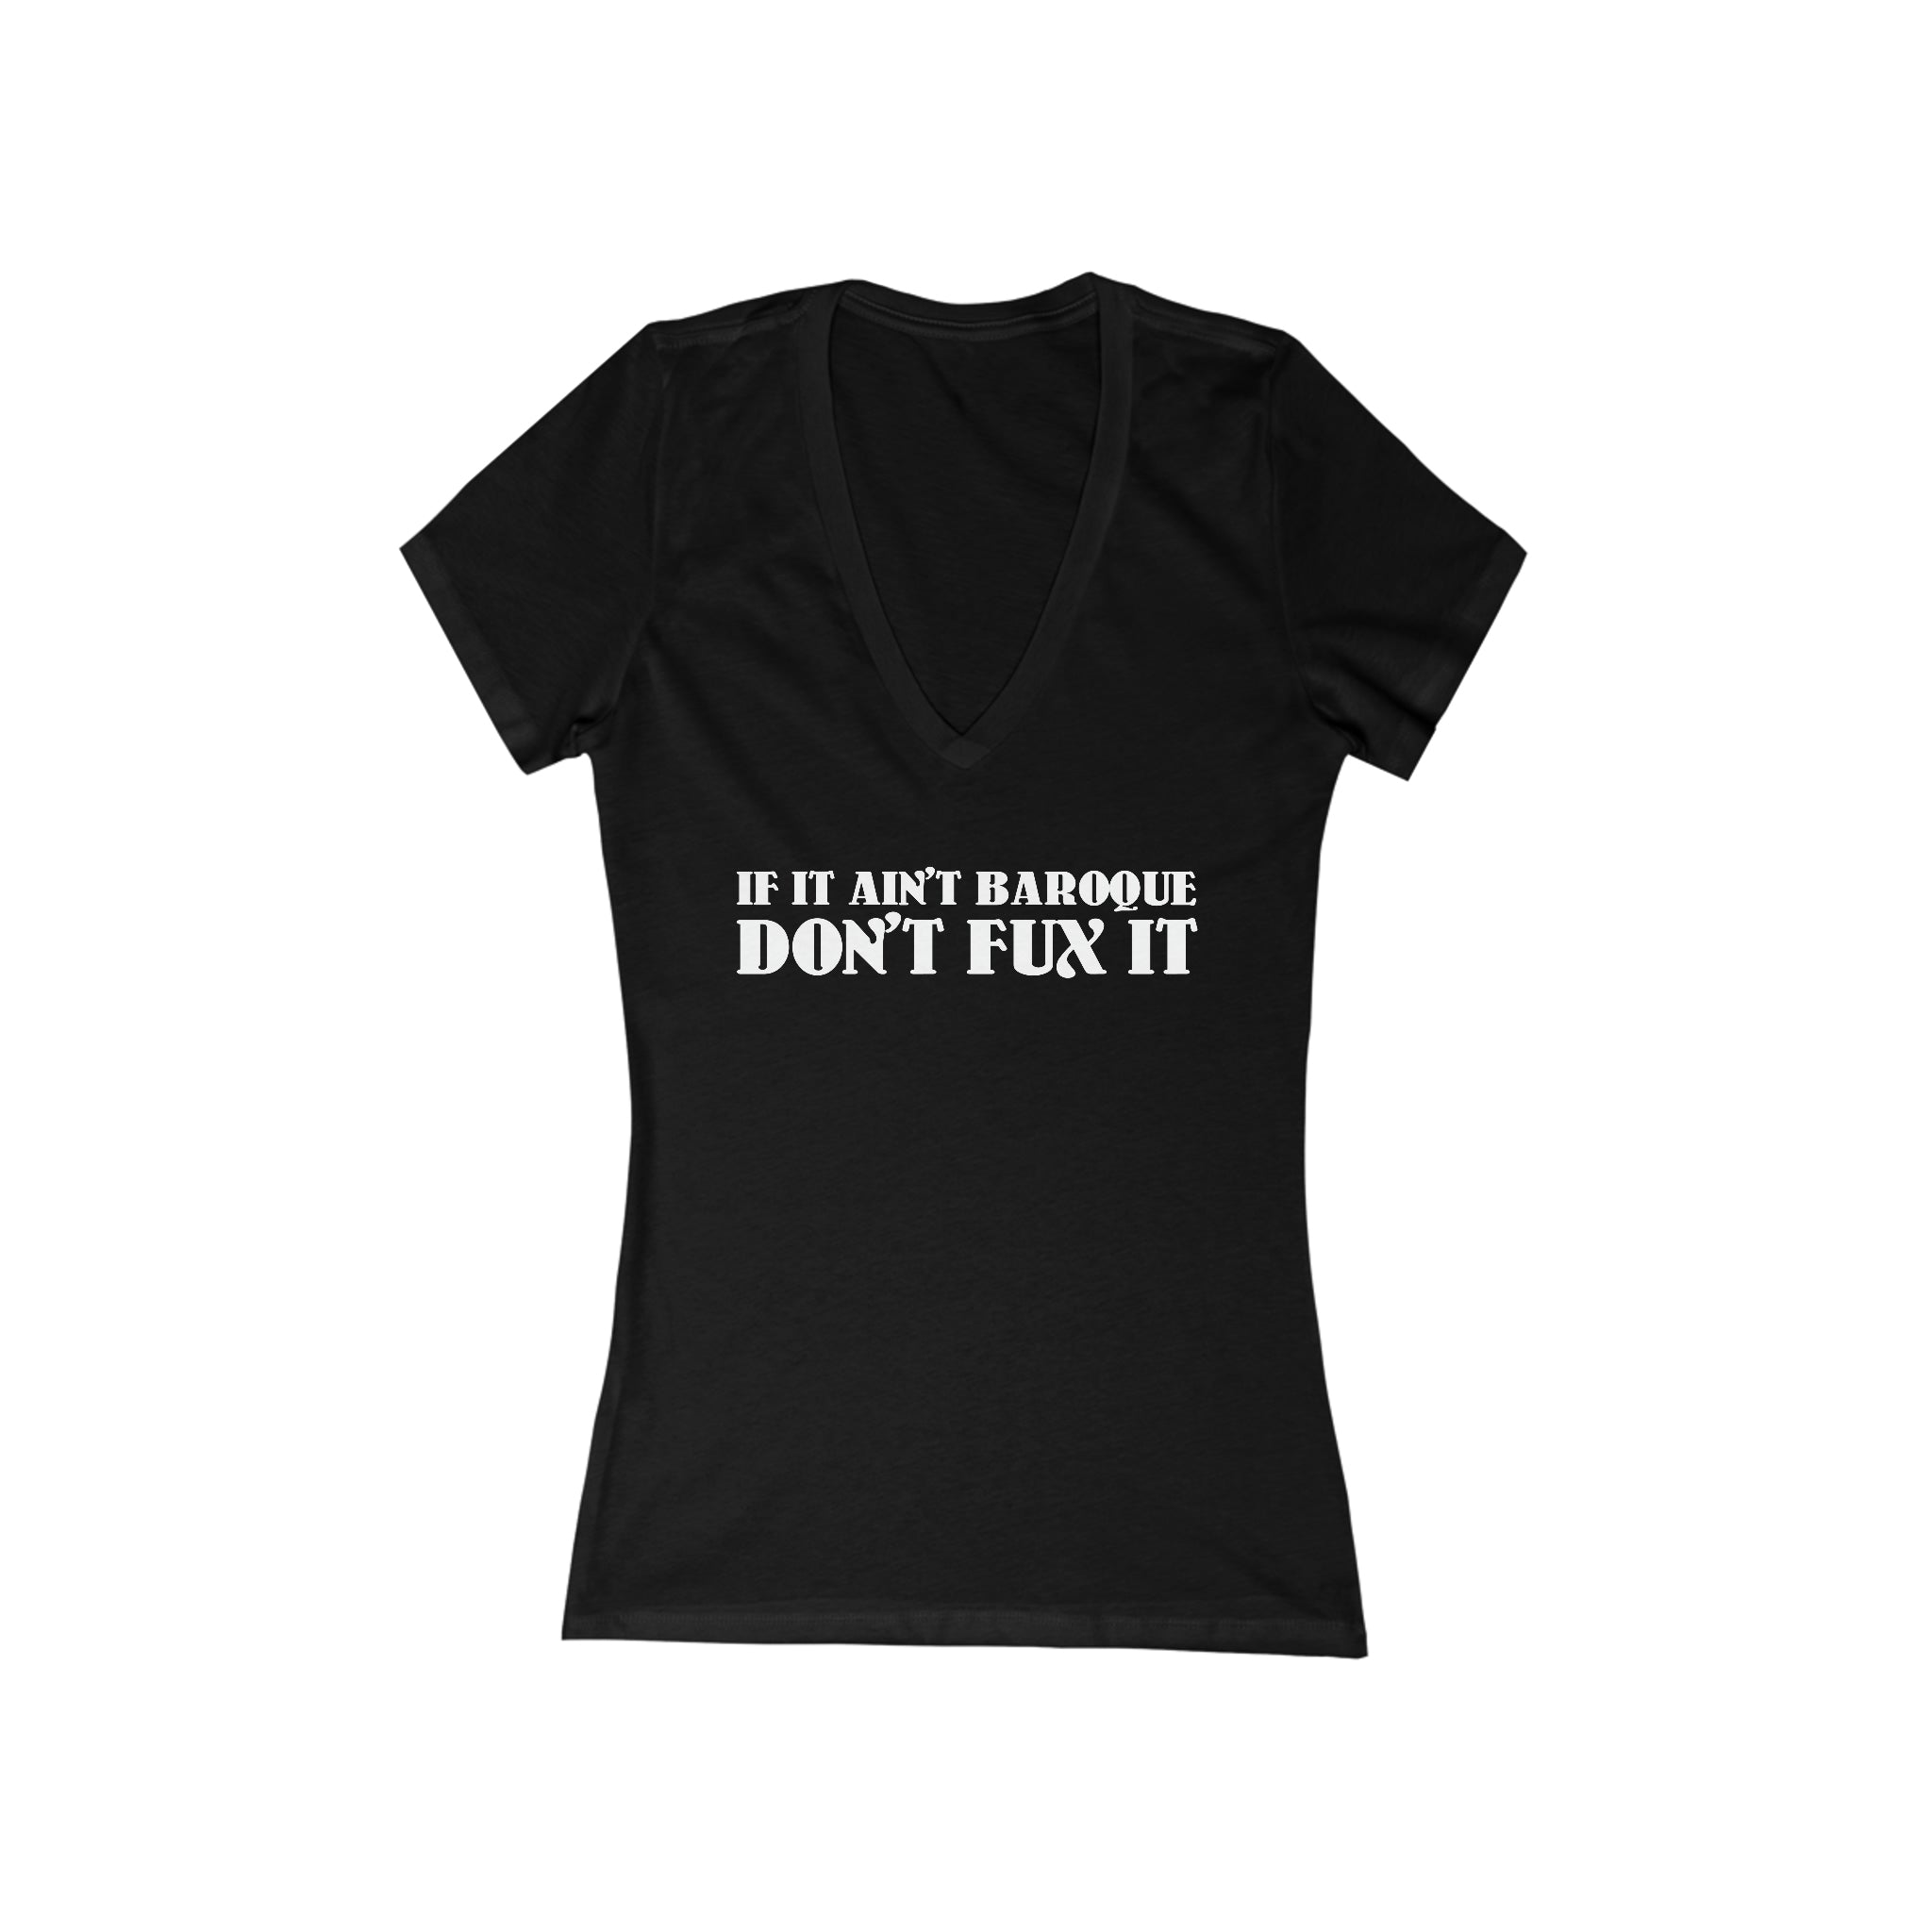 If it ain't baroque, don't Fux it - Short Sleeve Deep V-Neck Tee